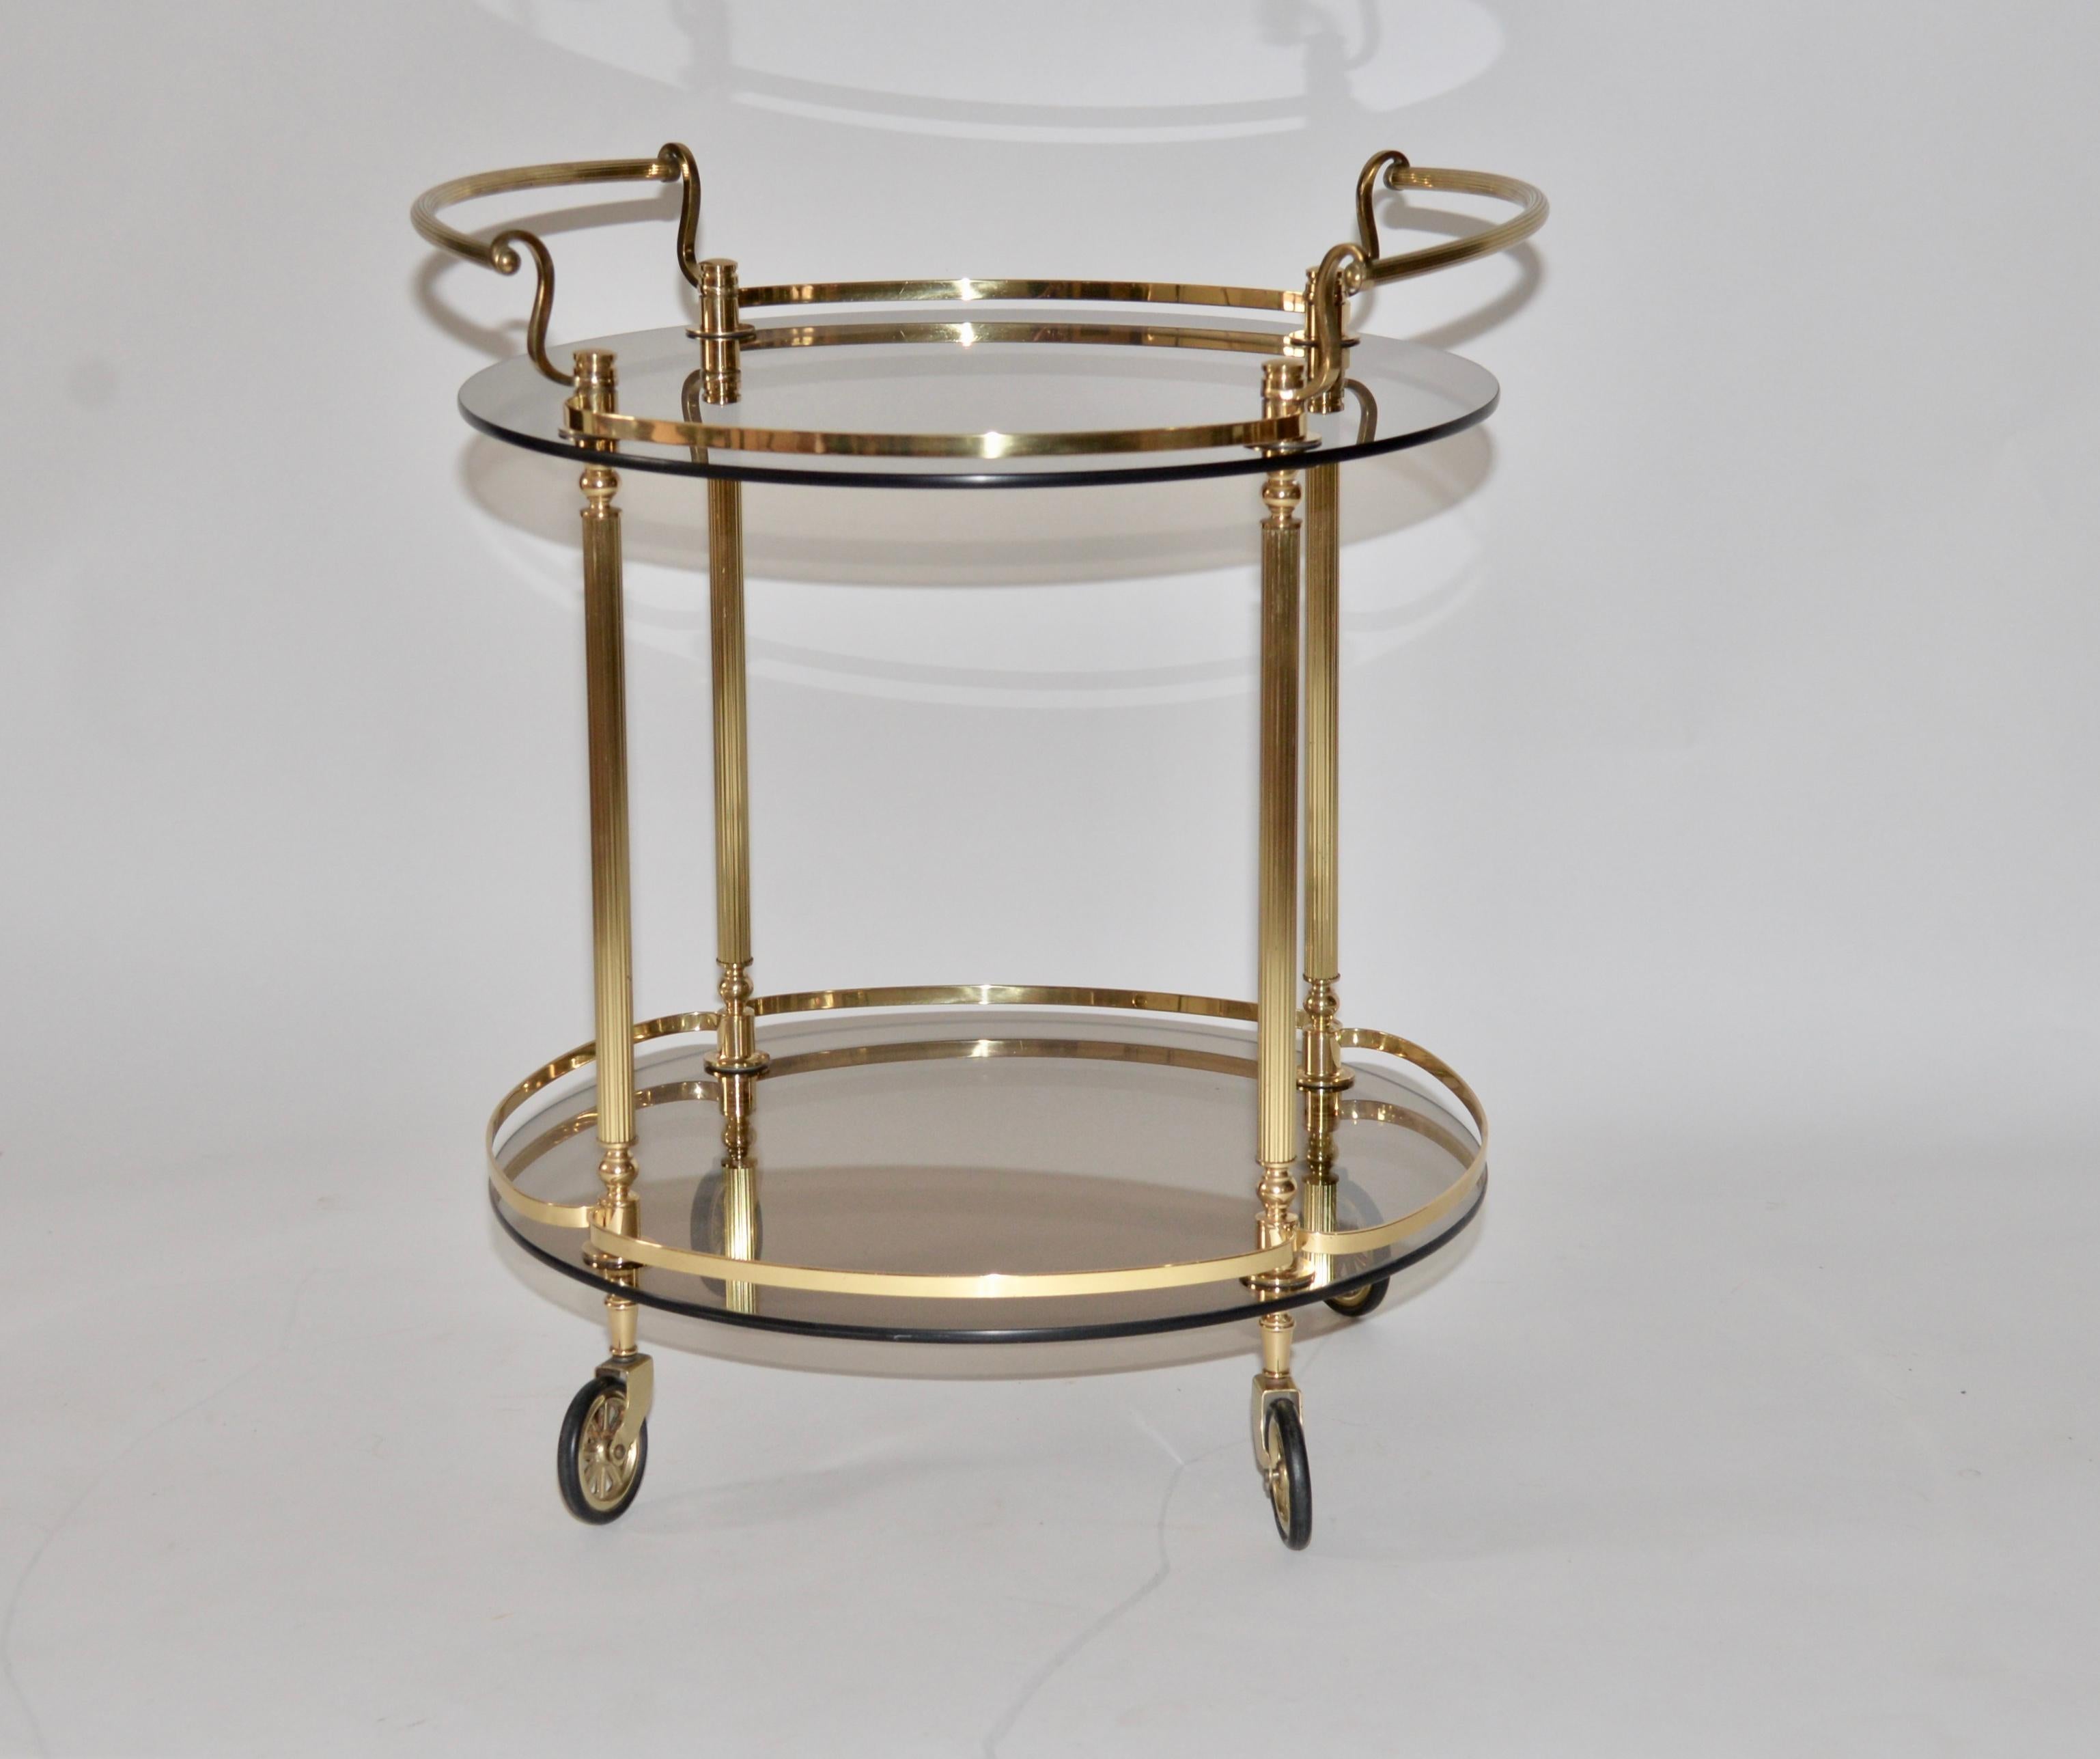 A French vintage polished brass and smoked glass drinks/serving trolley. This item has polished brass fluted uprights and two shelves. This is a lovely classic timeless item.